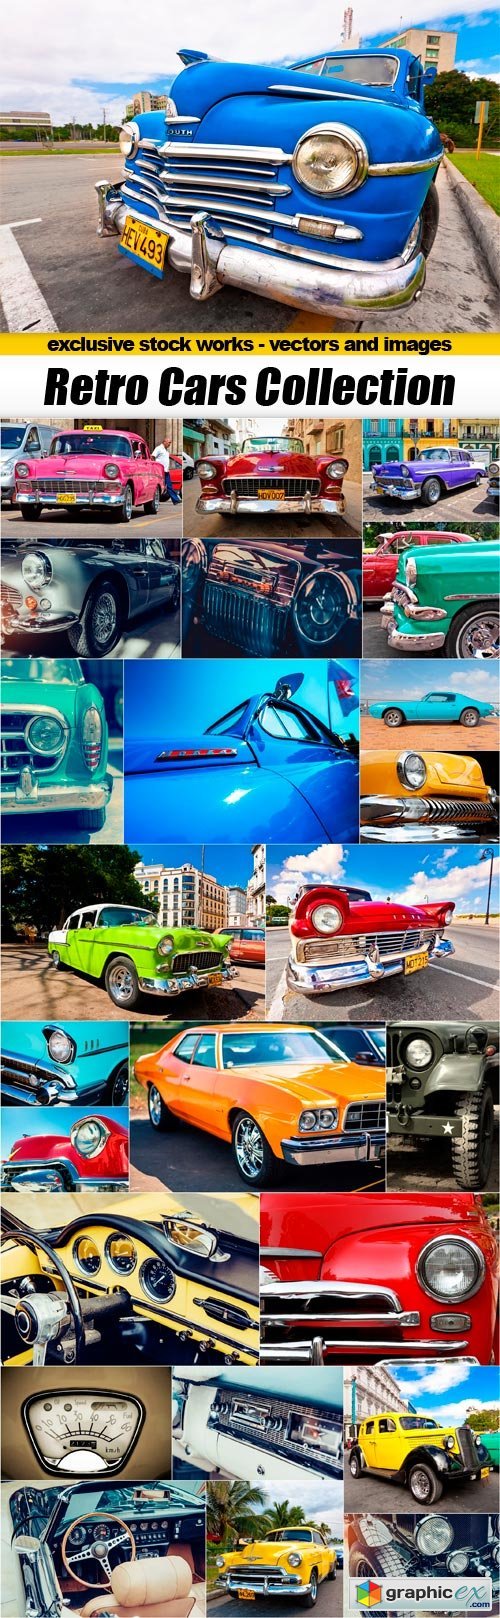 Retro Cars Collection - 25x JPEGs